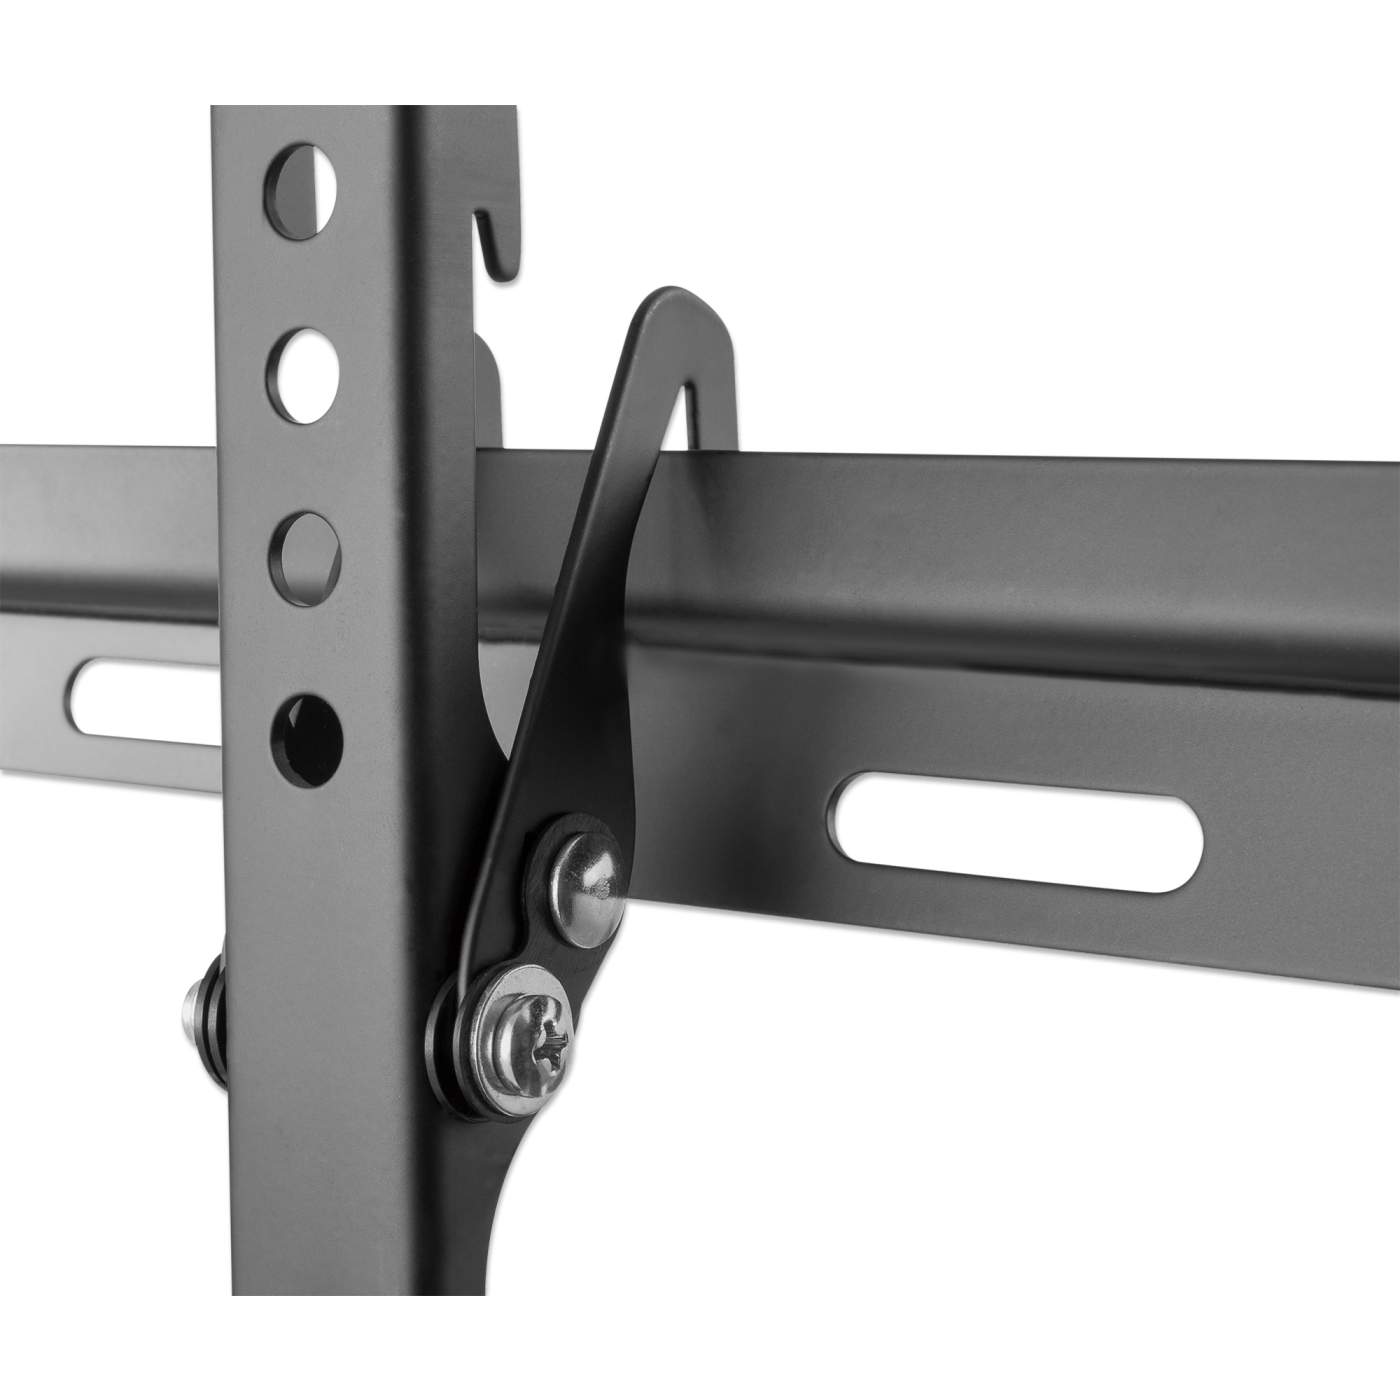 Low-Profile Tilting TV Wall Mount Image 8